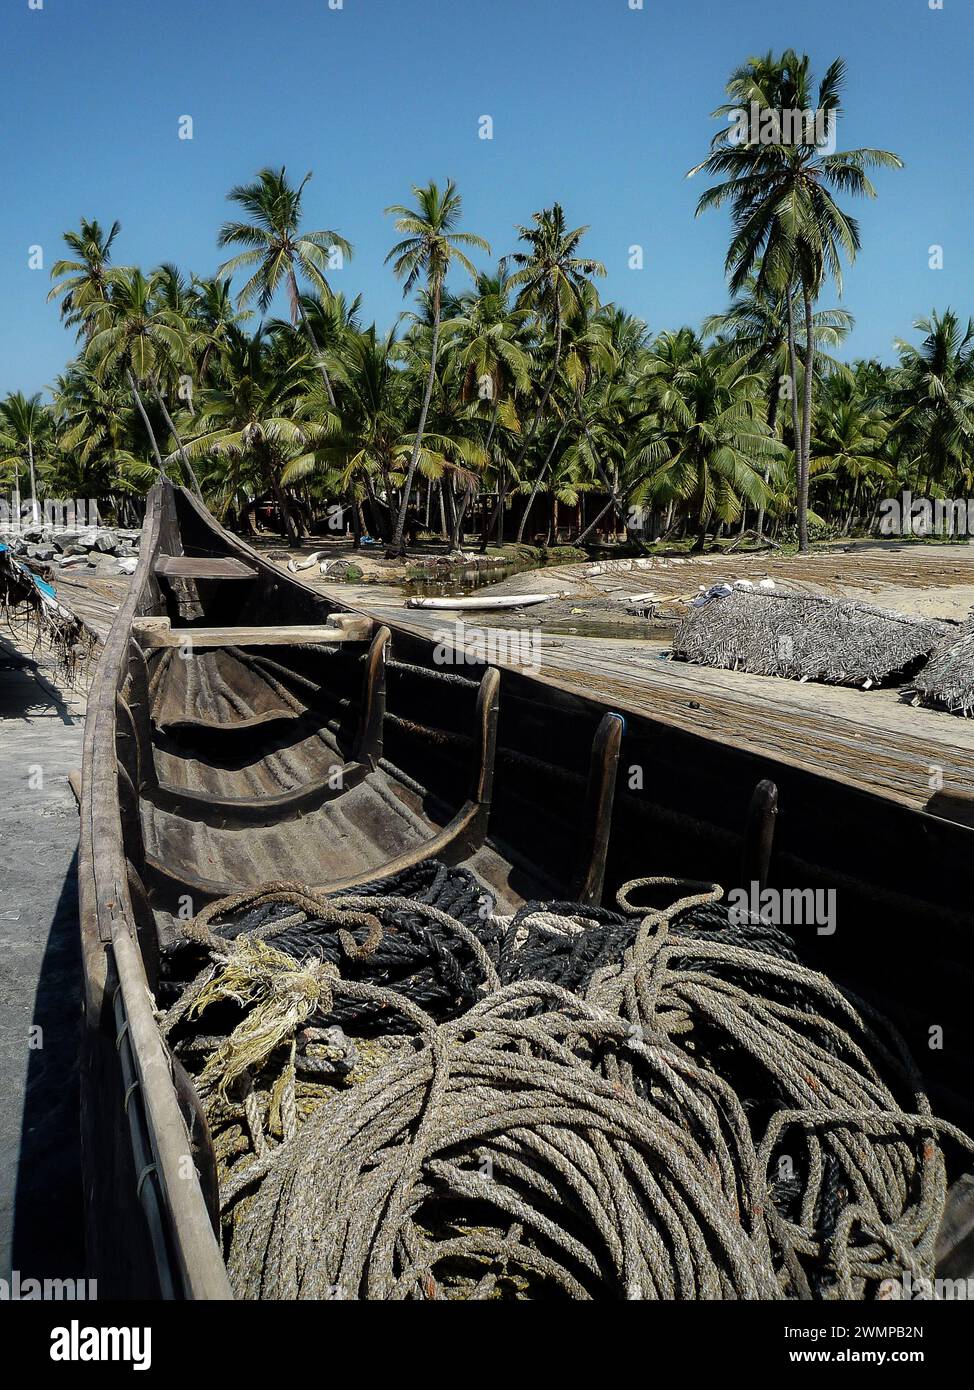 India, Kerala, Varkala: the bow of a traditional fishing boat on the beach of Varkala with ropes inside for fishing nets Stock Photo